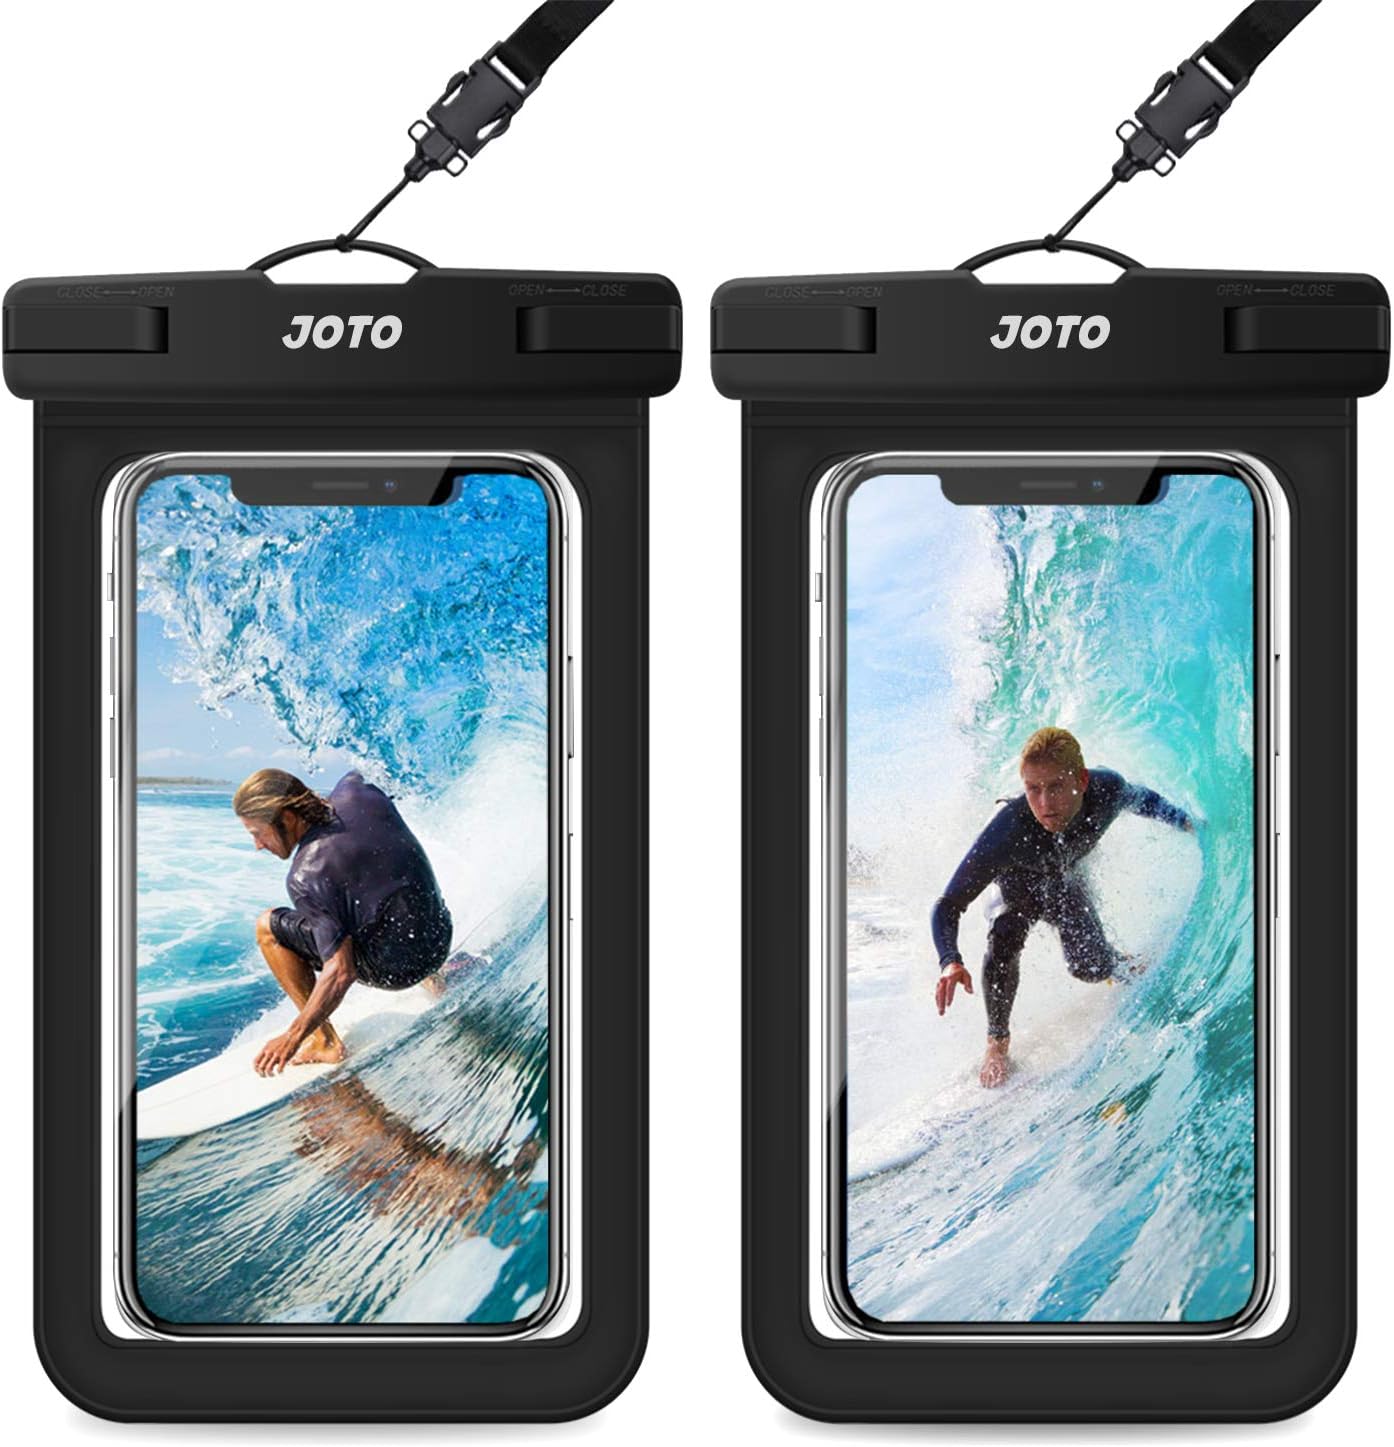 Buy JOTO Waterproof Case Universal Phone Holder Pouch, Underwater Cellphone Dry Bag Compatible with iPhone 13 Pro 12 11 Pro Max XS XR X 8 7 6S, Galaxy S21 S20 S10 Note